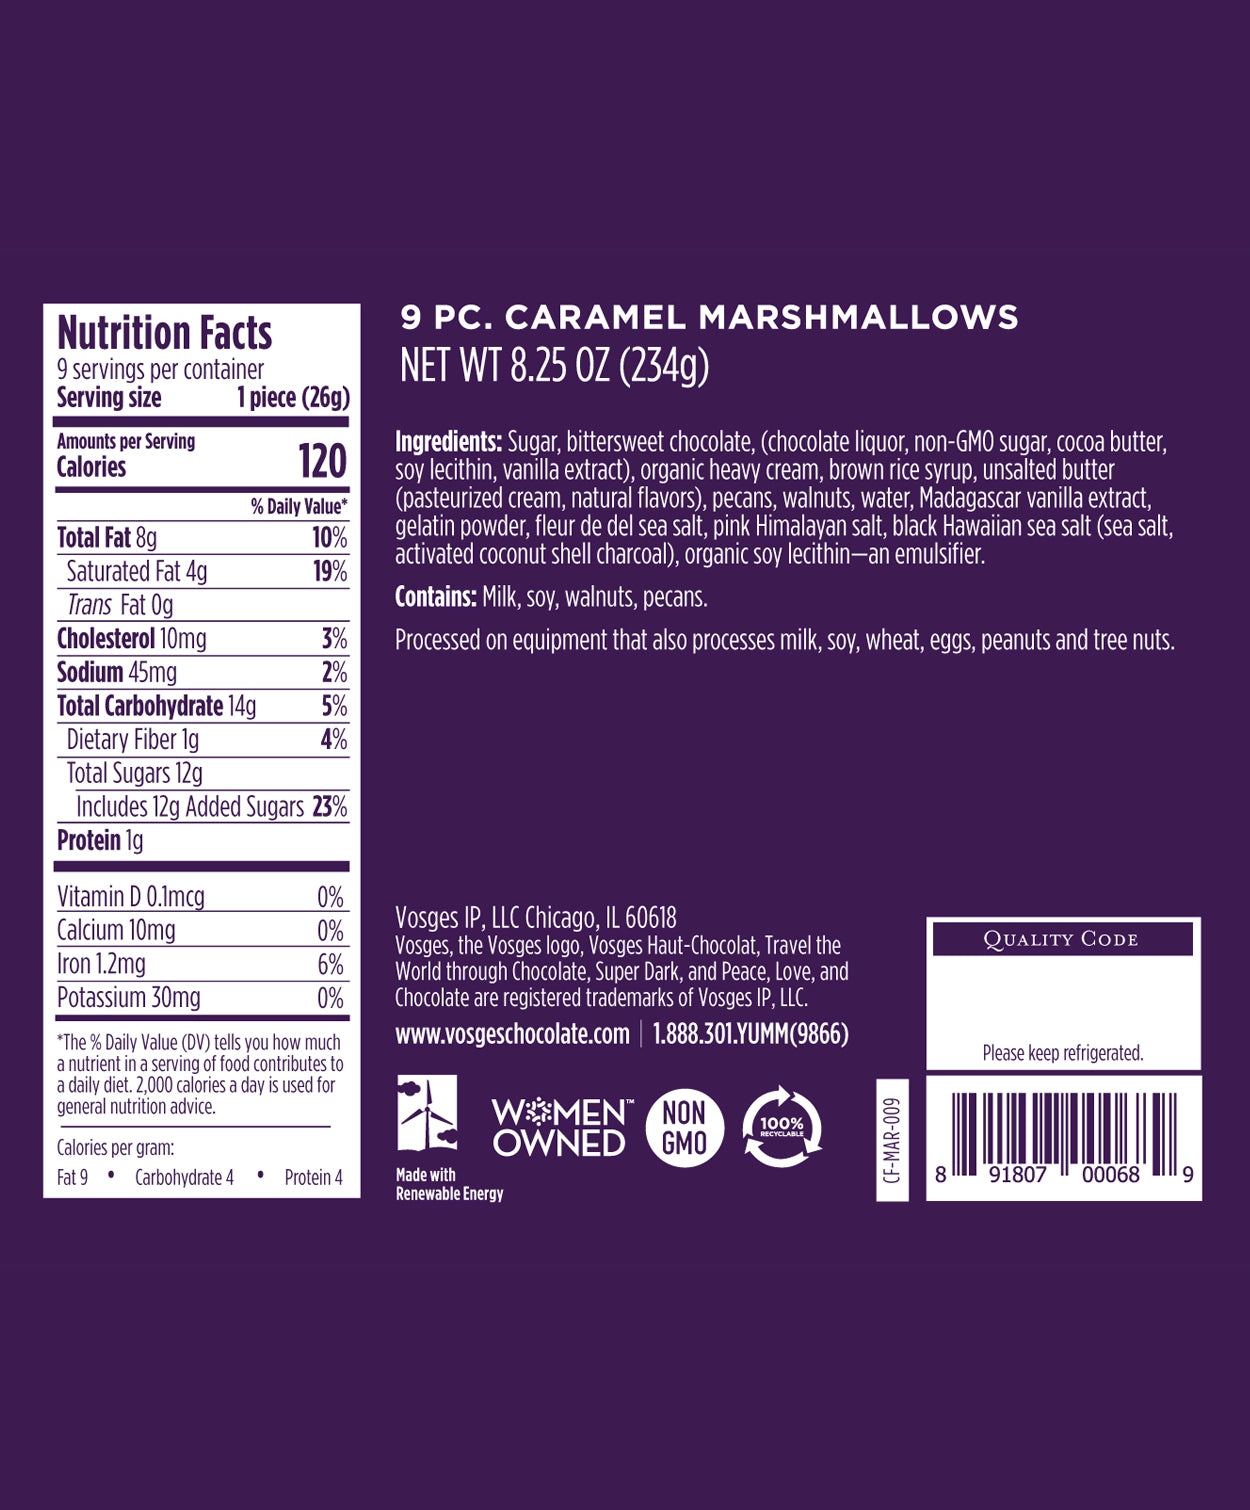 Nutrition Facts and Ingredients of Vosges Haut-Chocolat 9 piece Caramel Marshmallows in white, san-serif font on a deep purple background.